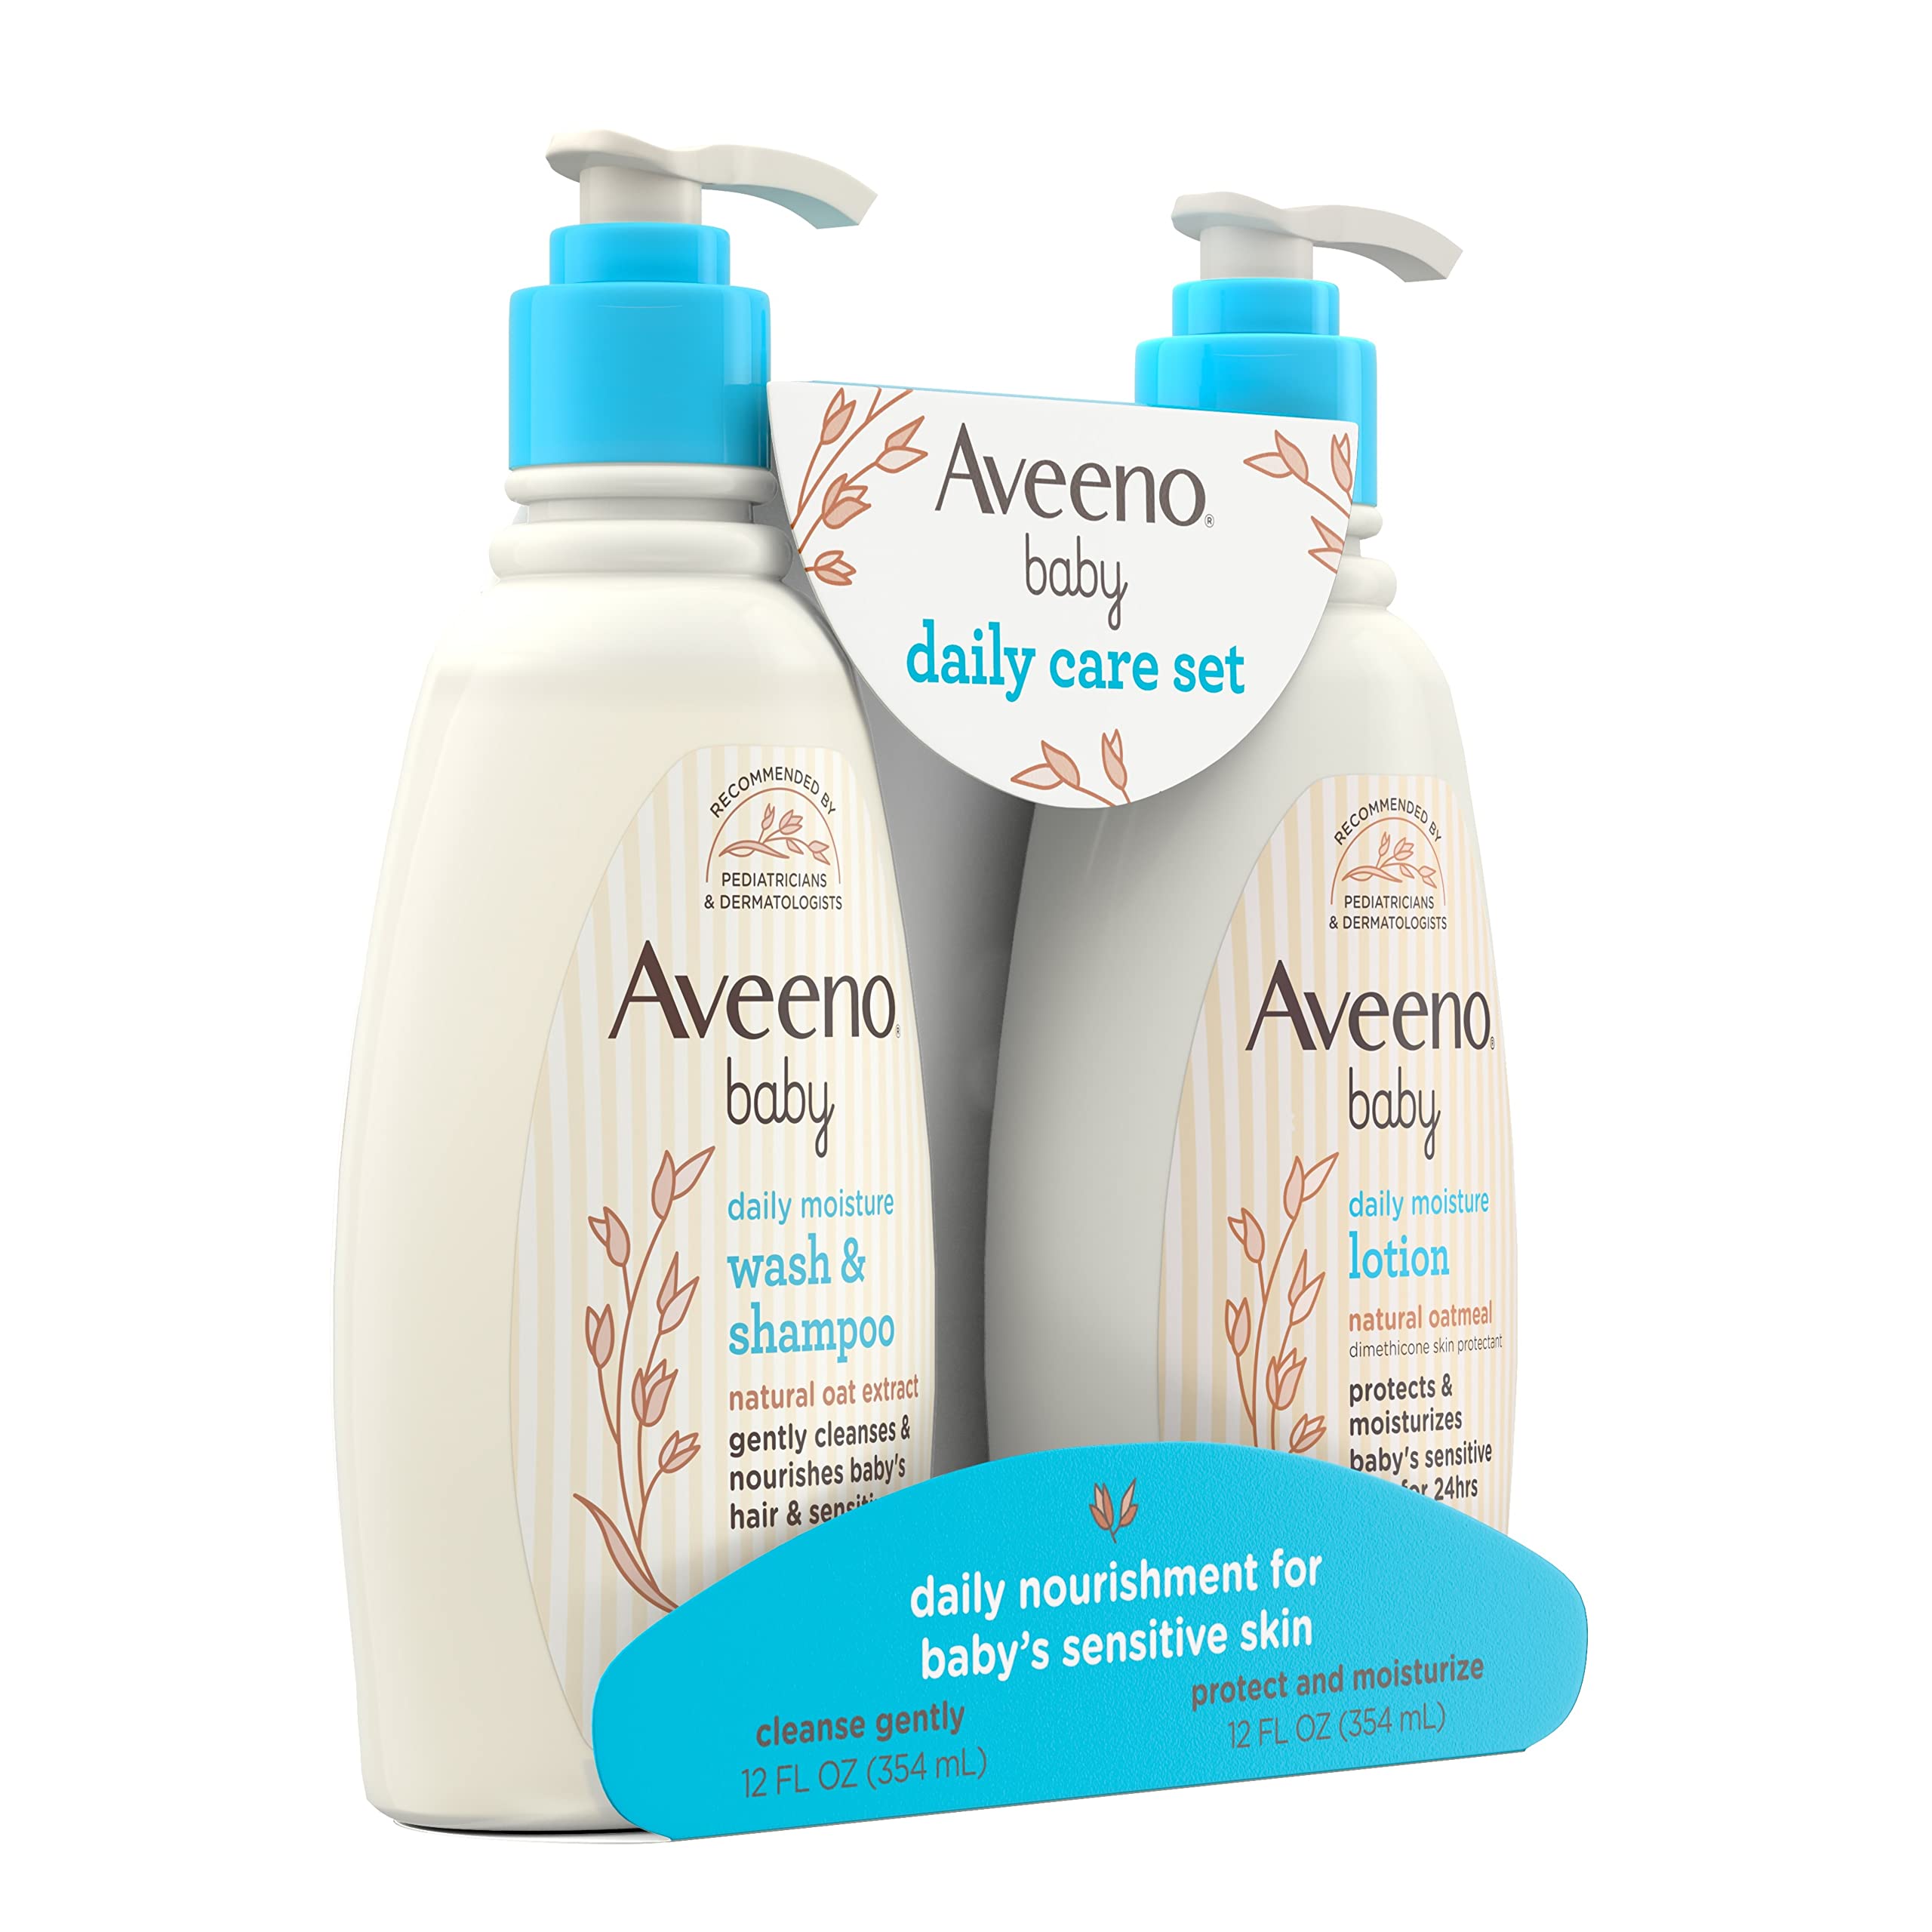 Aveeno Baby Daily Care Gift Set with Natural Oat Extract & Oatmeal, Contains Daily Moisturizing Body Lotion & Gentle 2-in-1 Baby Bath Wash & Shampoo, Hypoallergenic & Paraben-Free, 2 items